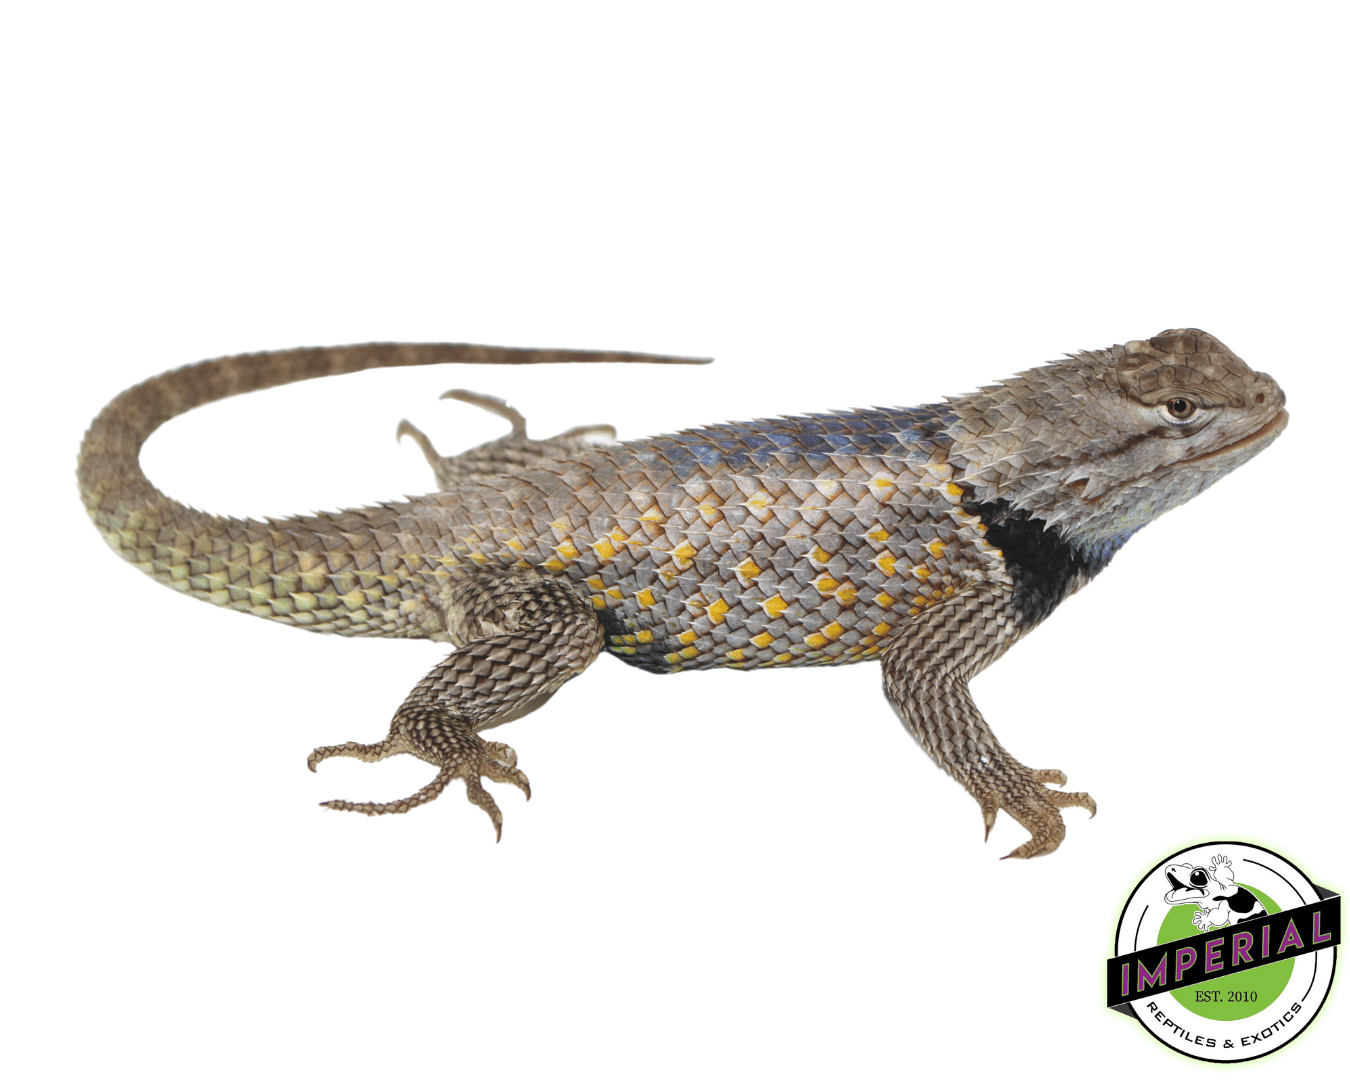 Texas Spiny Lizard for sale online at cheap prices, buy reptiles for sale near me